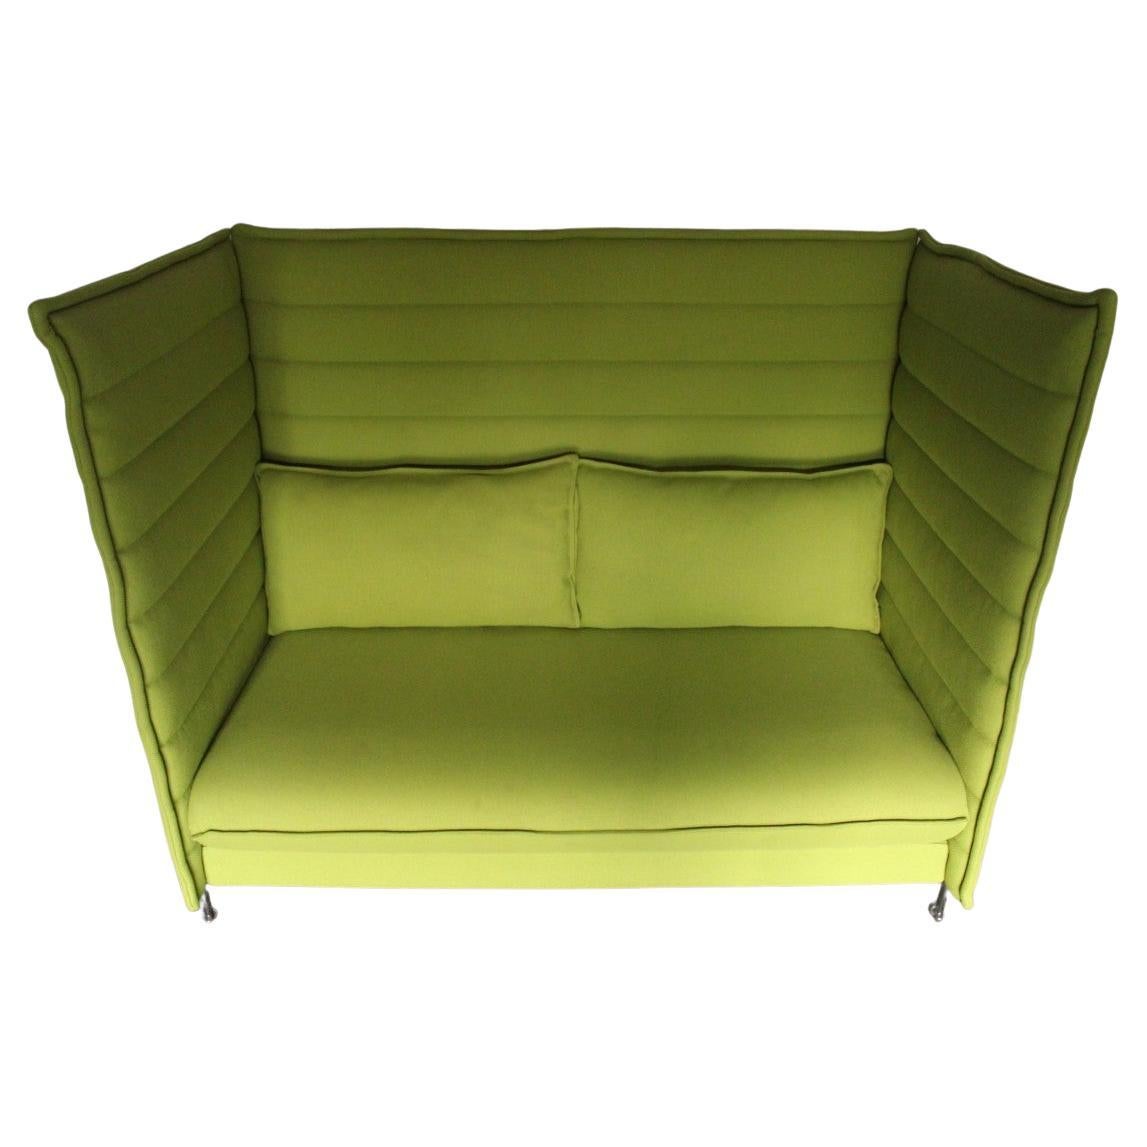 Sublime Mint Vitra “Alcove” 2-Seat Highback Sofa in Lime Green “Credo” Fabric 